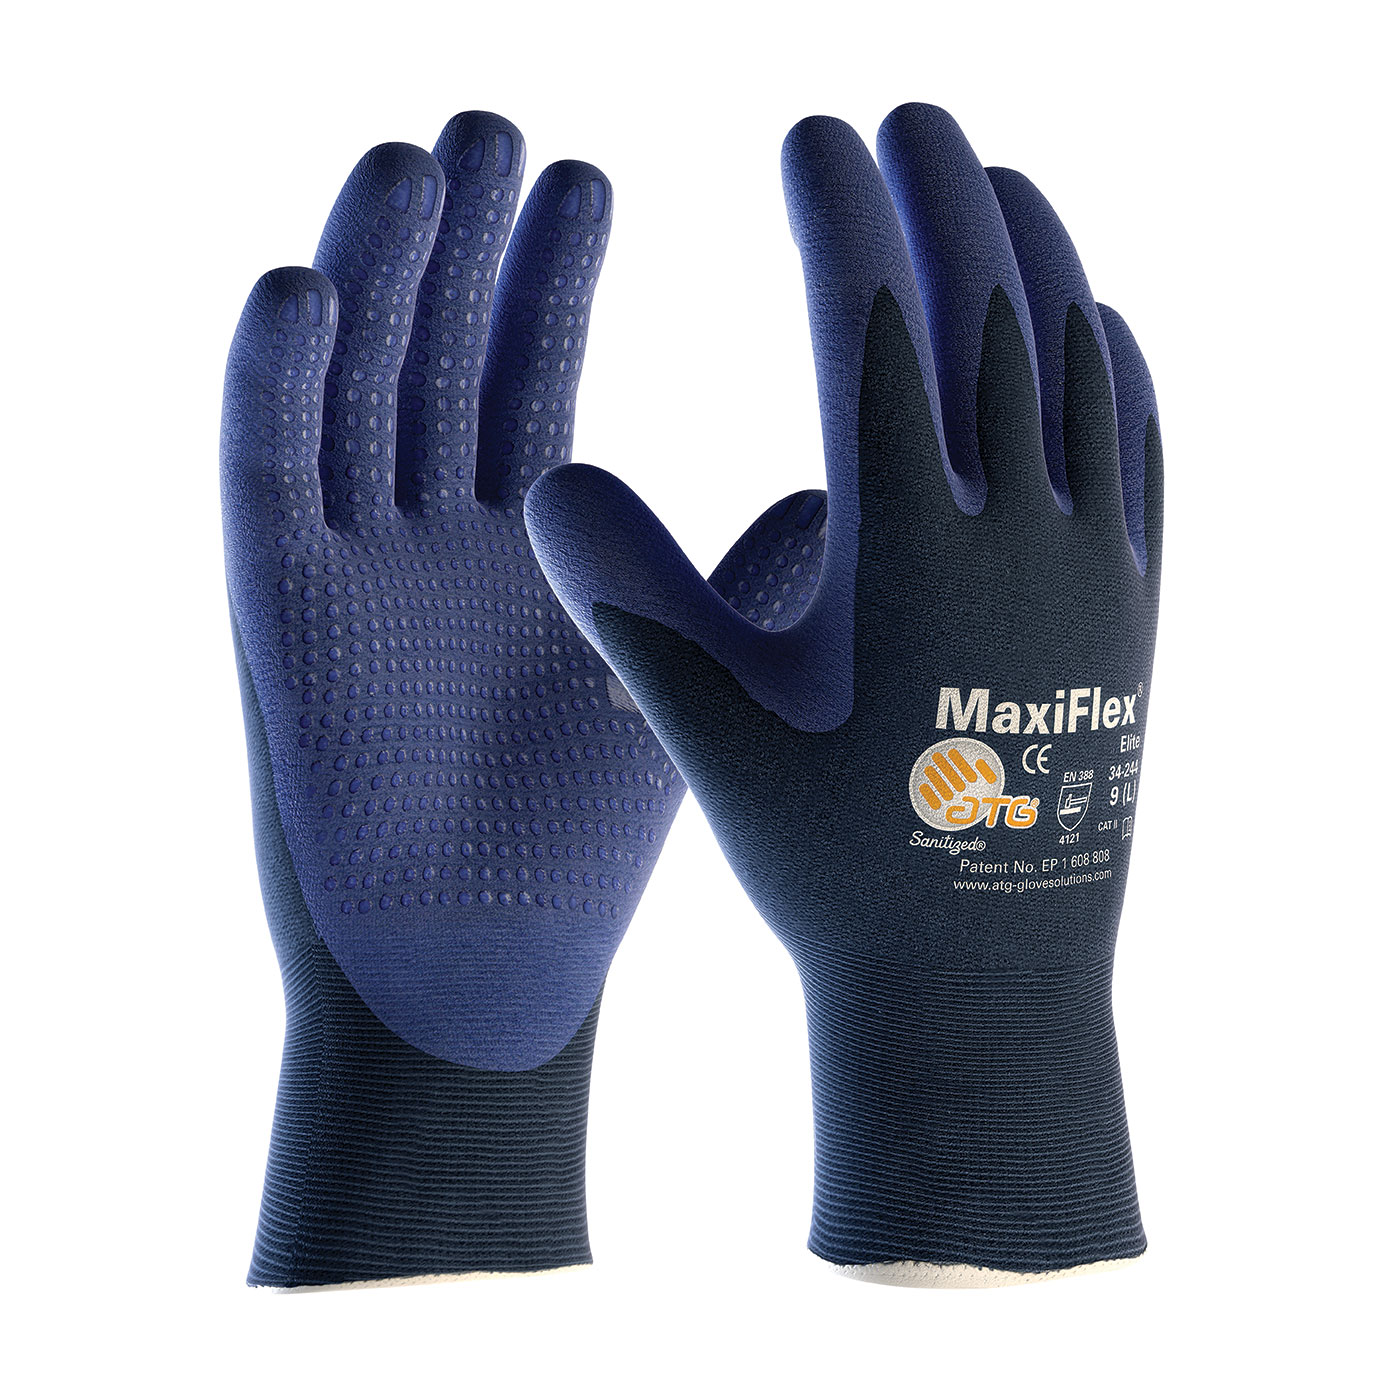 ULTRA LIGHT WEIGHT SEAMLESS KNIT NYLON GLOVE WITH NITRILE COATED MICROFOAM GRIP ON PALM & FINGERS - MICRO DOT PALM